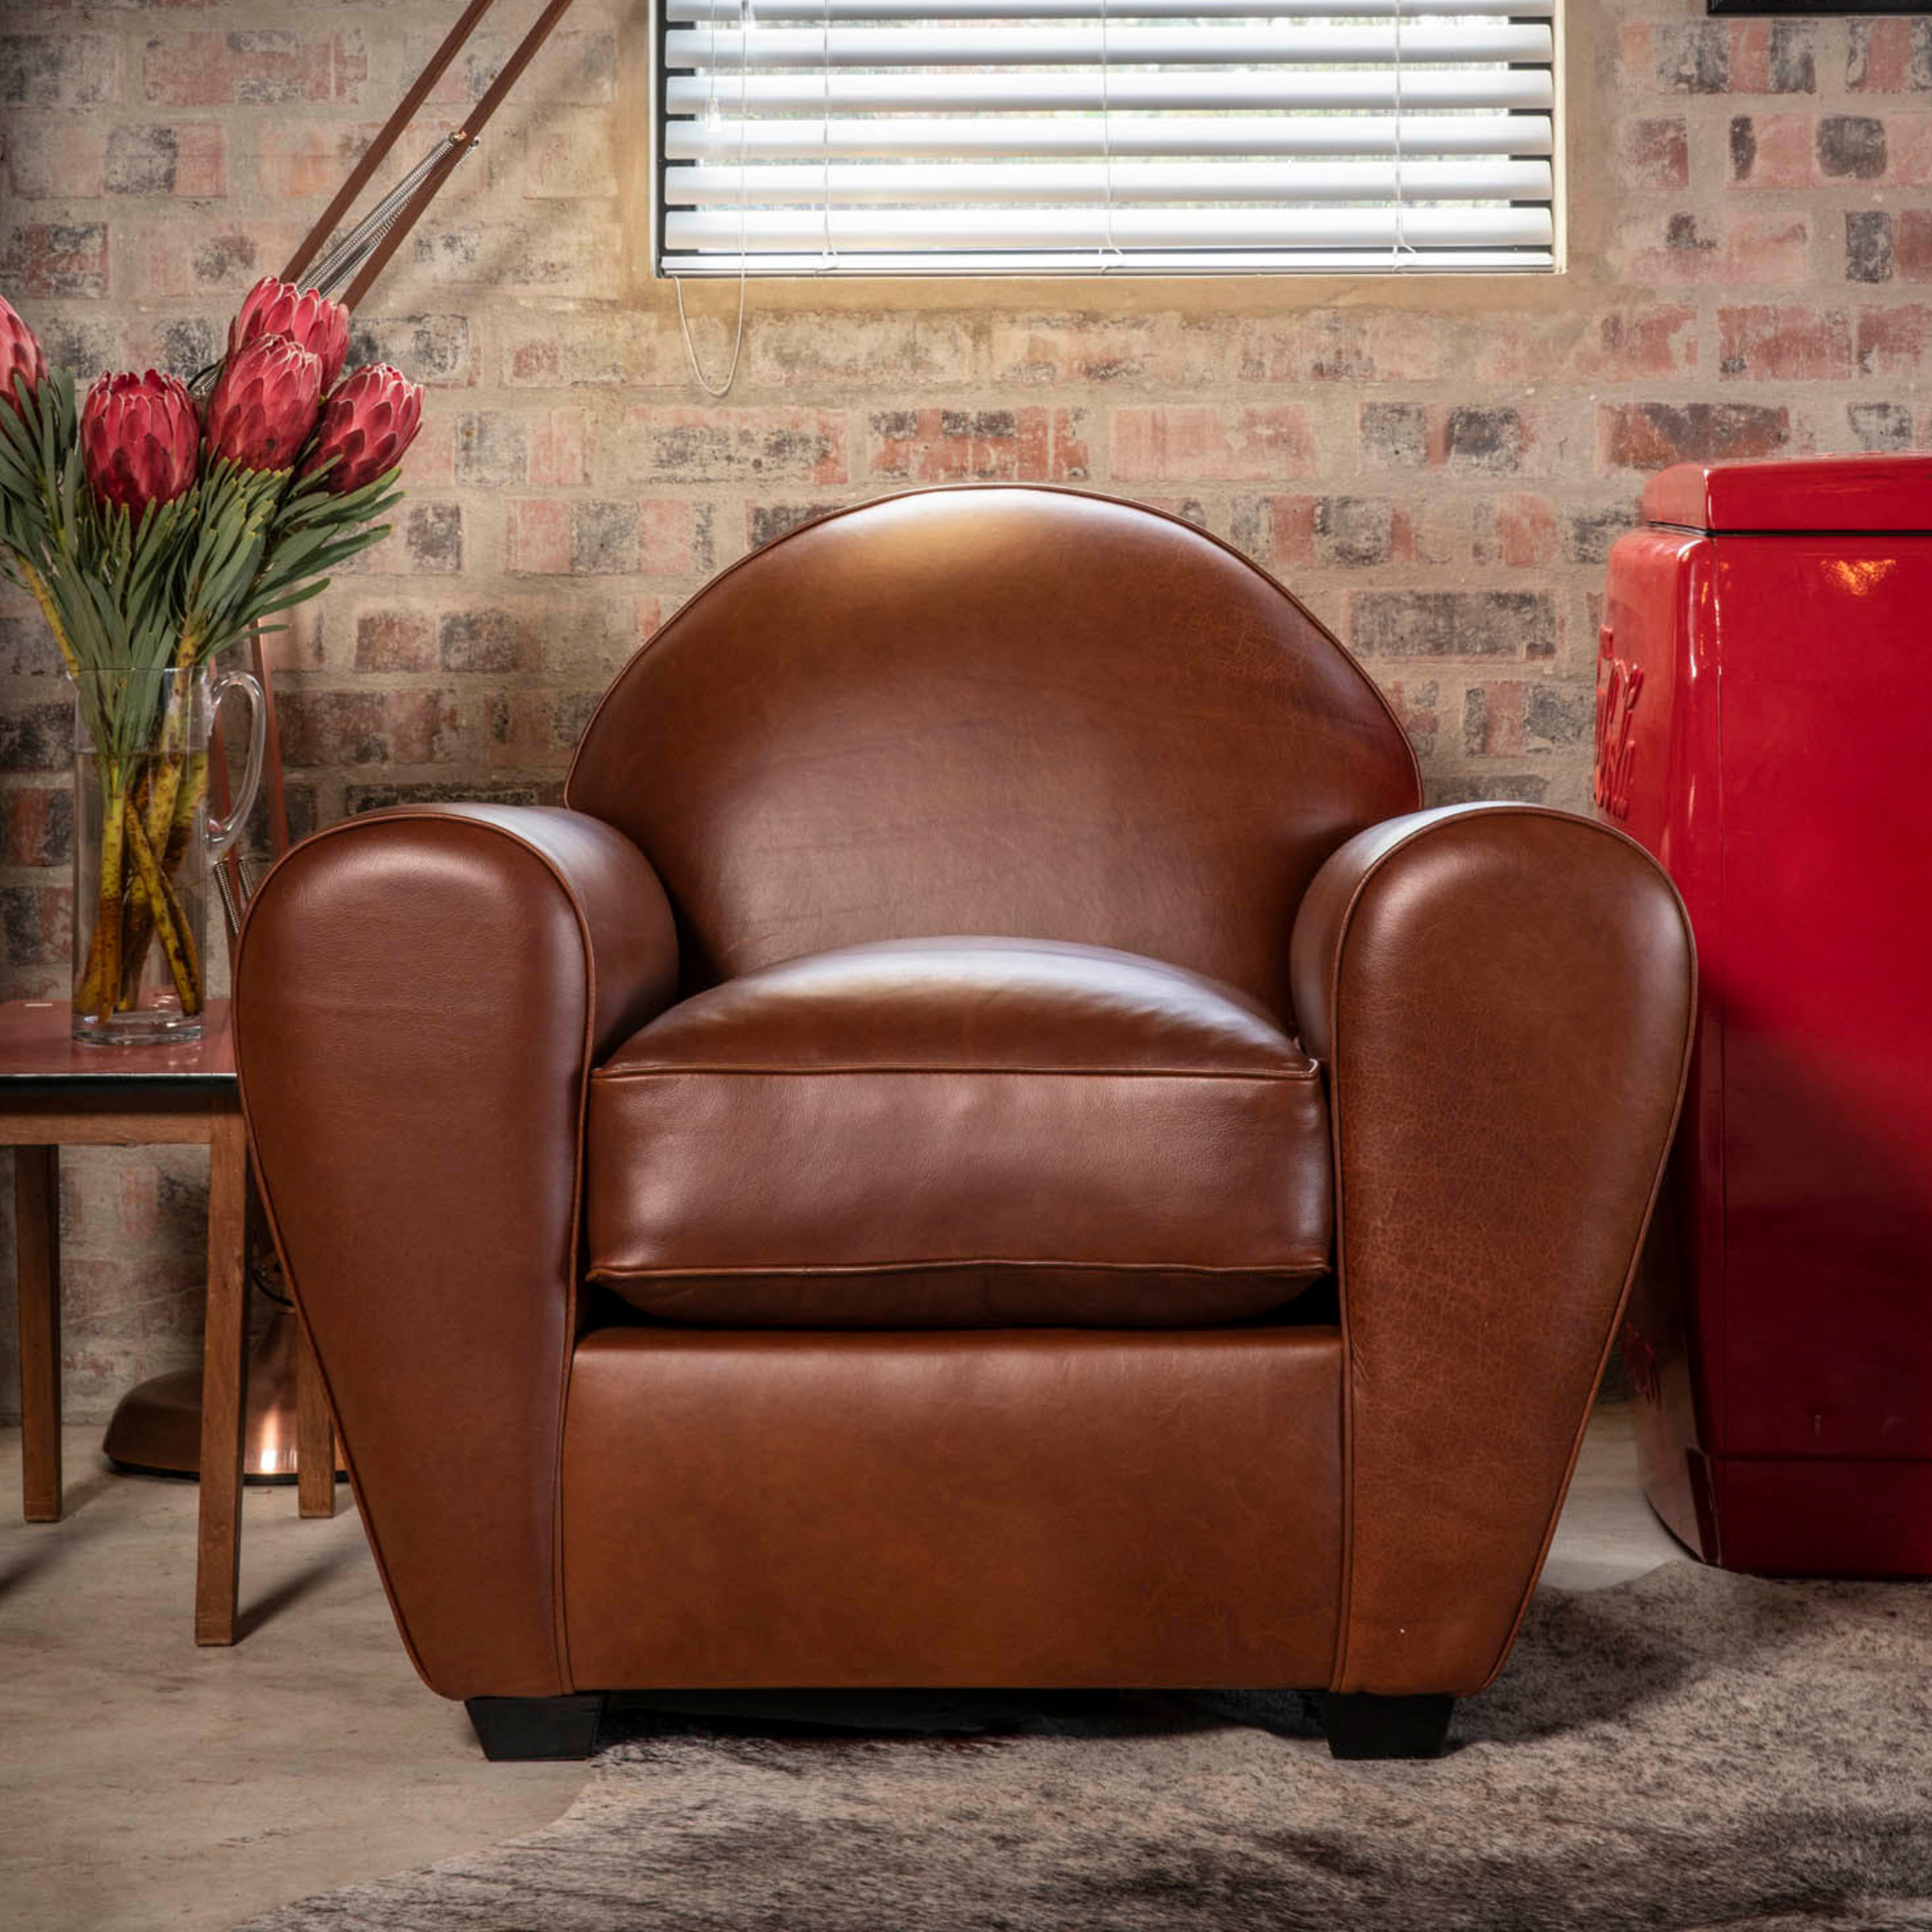 Cuba Armchair – Inspired by the cigar lounges of Havana, the Cuba Armchair boasts a low-profile sprung back and a soft-filled cushion, providing the perfect setting for kicking back and chilling.  Personalize your experience by choosing your favorite color from our range of premium quality leathers. Immerse yourself in the comfort and style inspired by the vibrant atmosphere of Cuba.